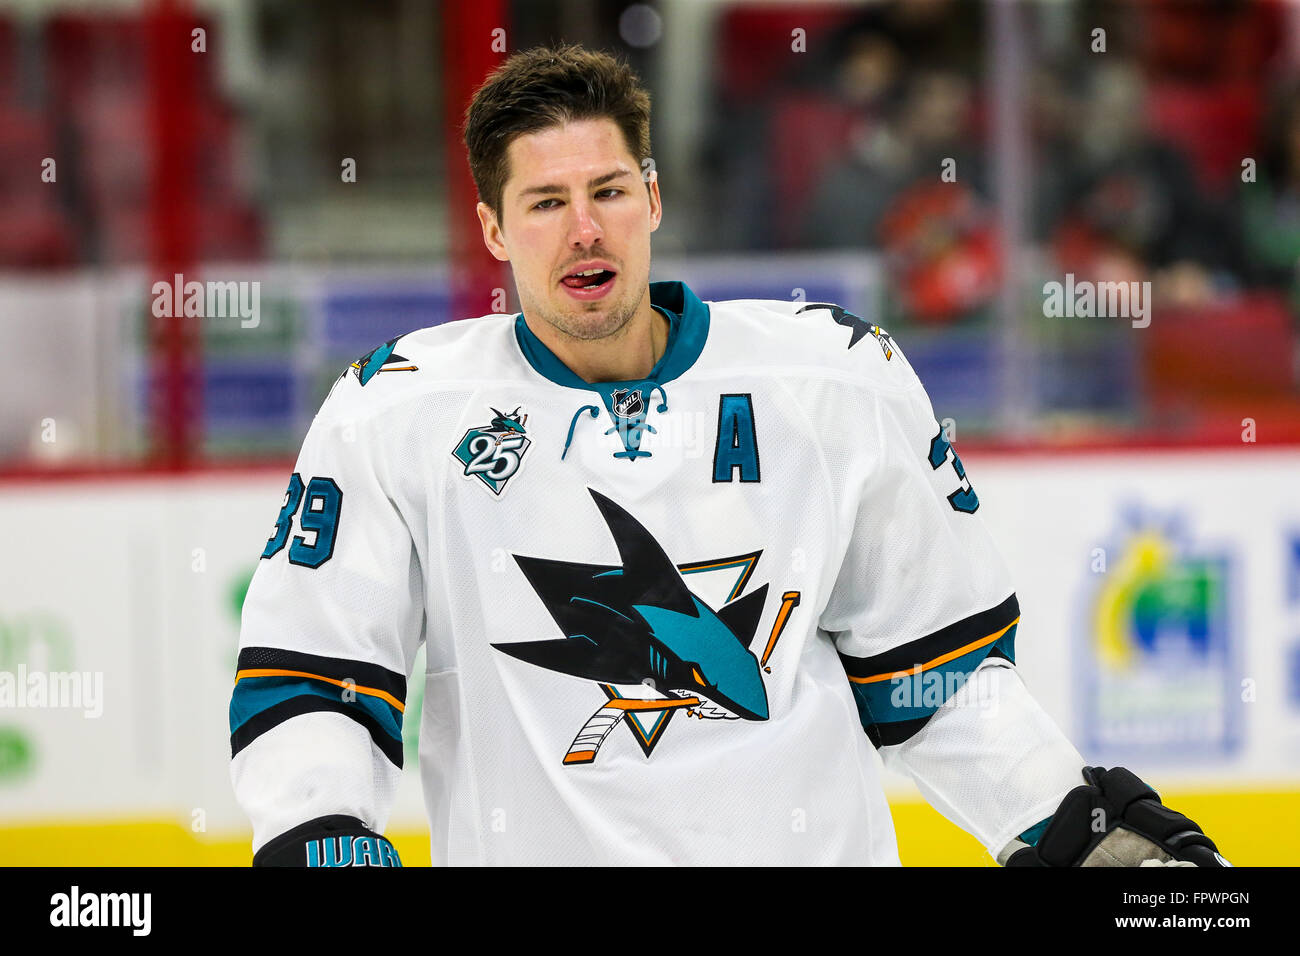 San Jose Sharks captain Logan Couture remains out indefinitely